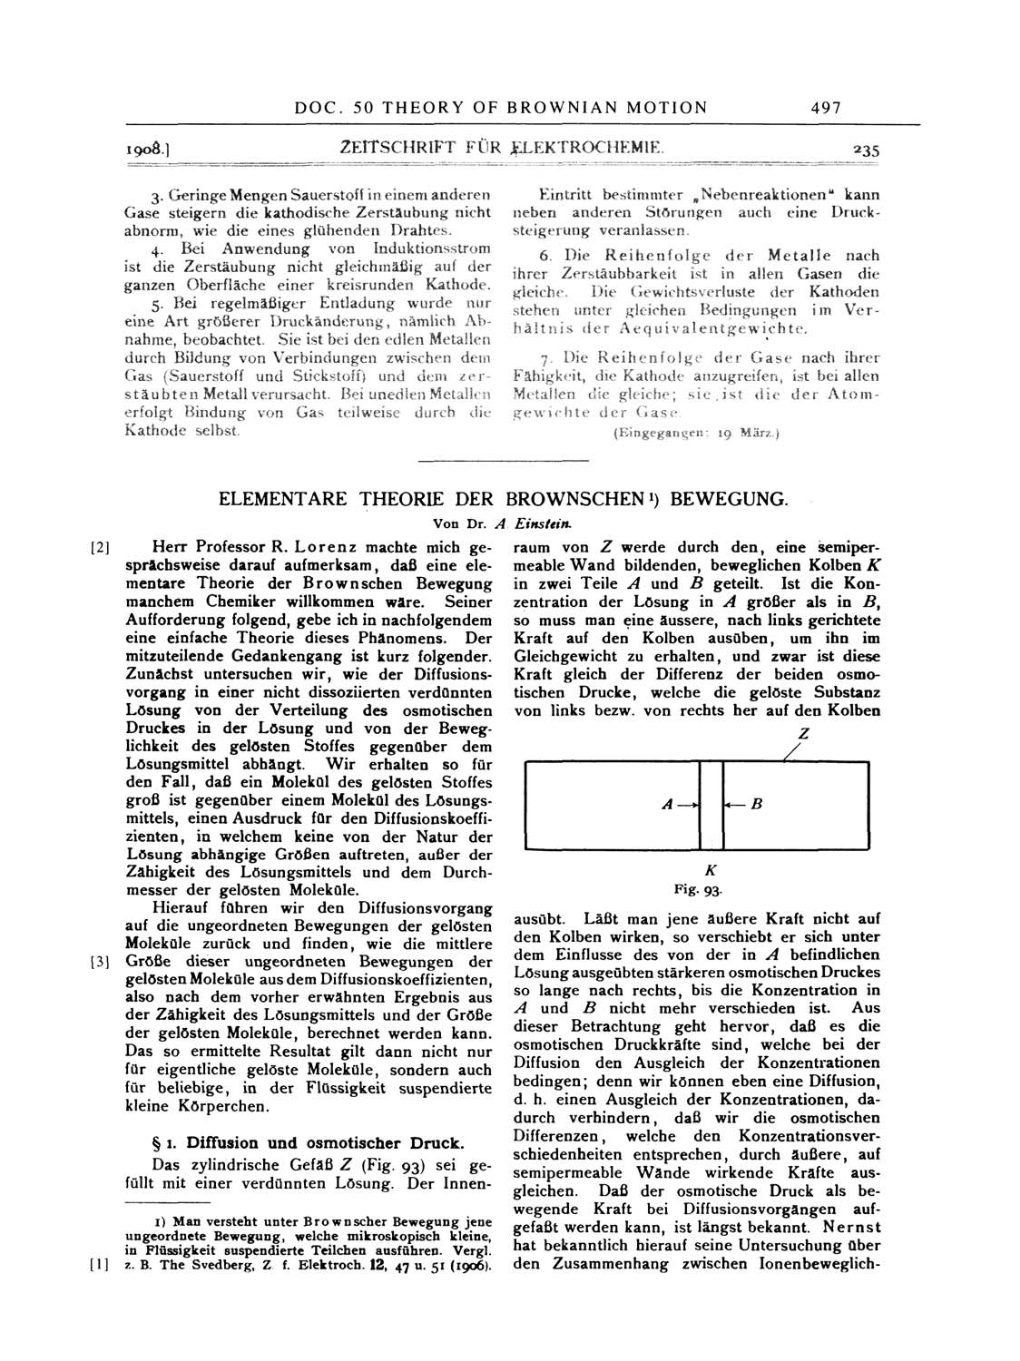 Volume 2: The Swiss Years: Writings, 1900-1909 page 497